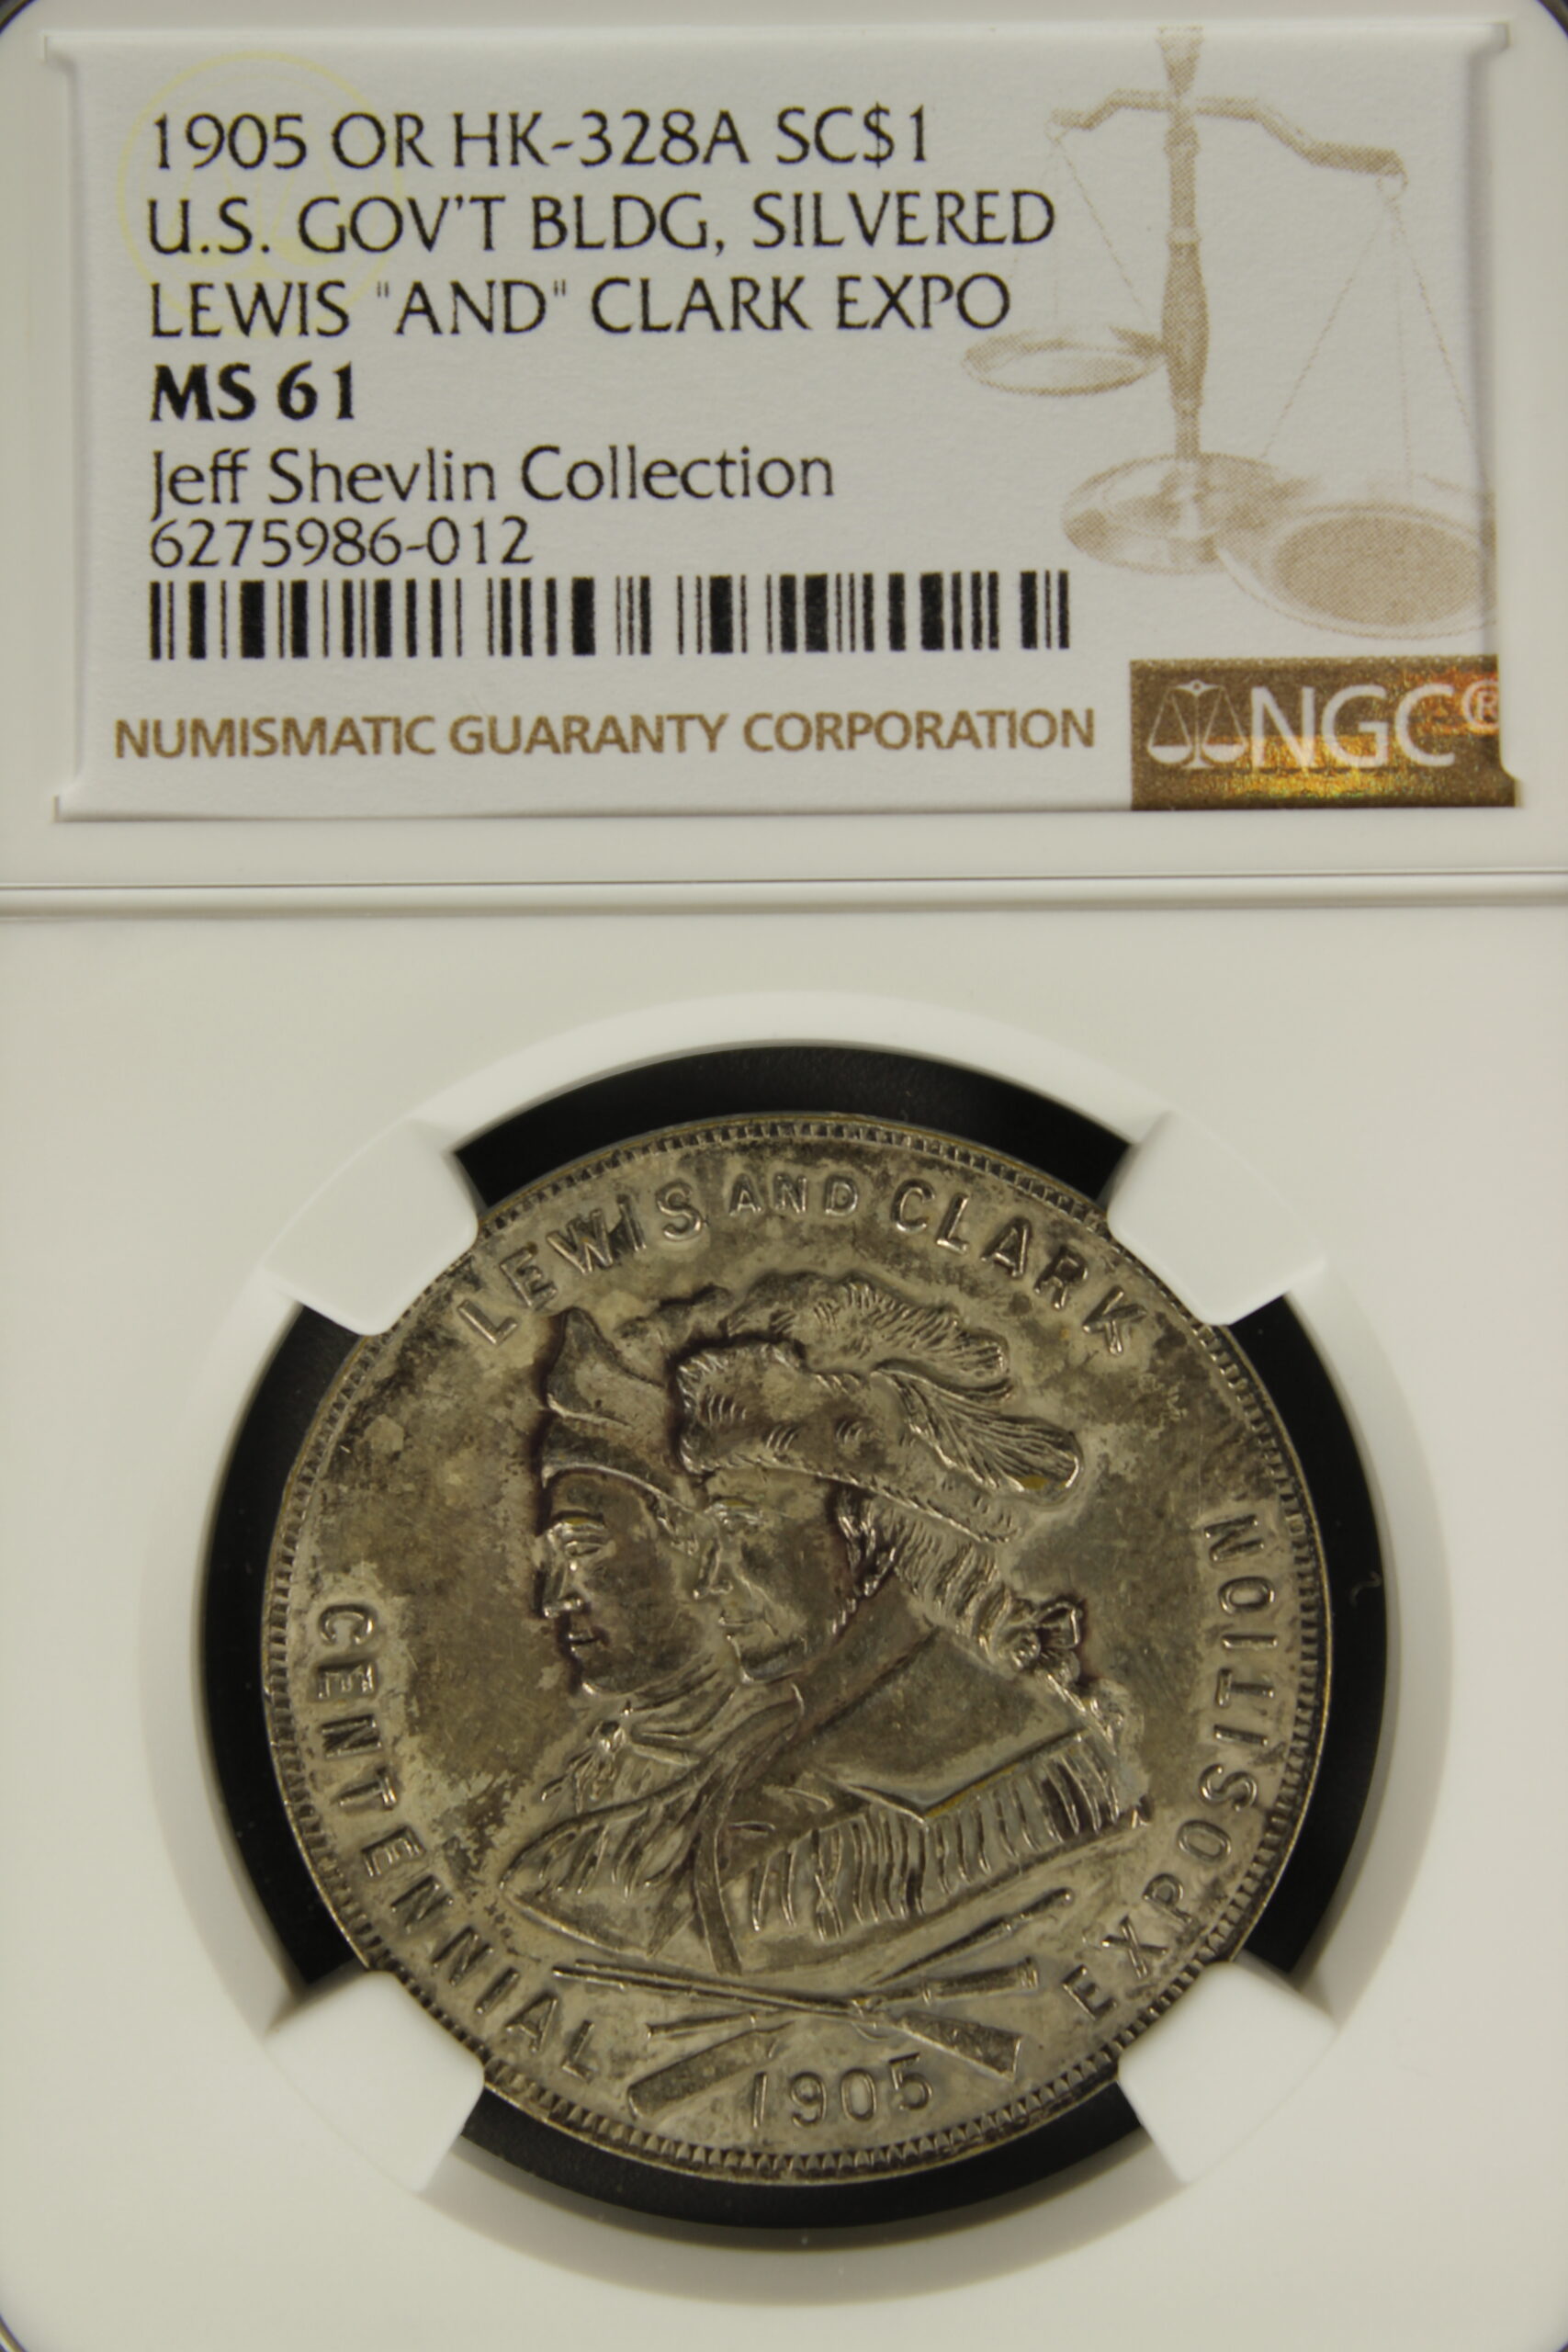 HK-328A 1905 Lewis and Clark 34mm SCD